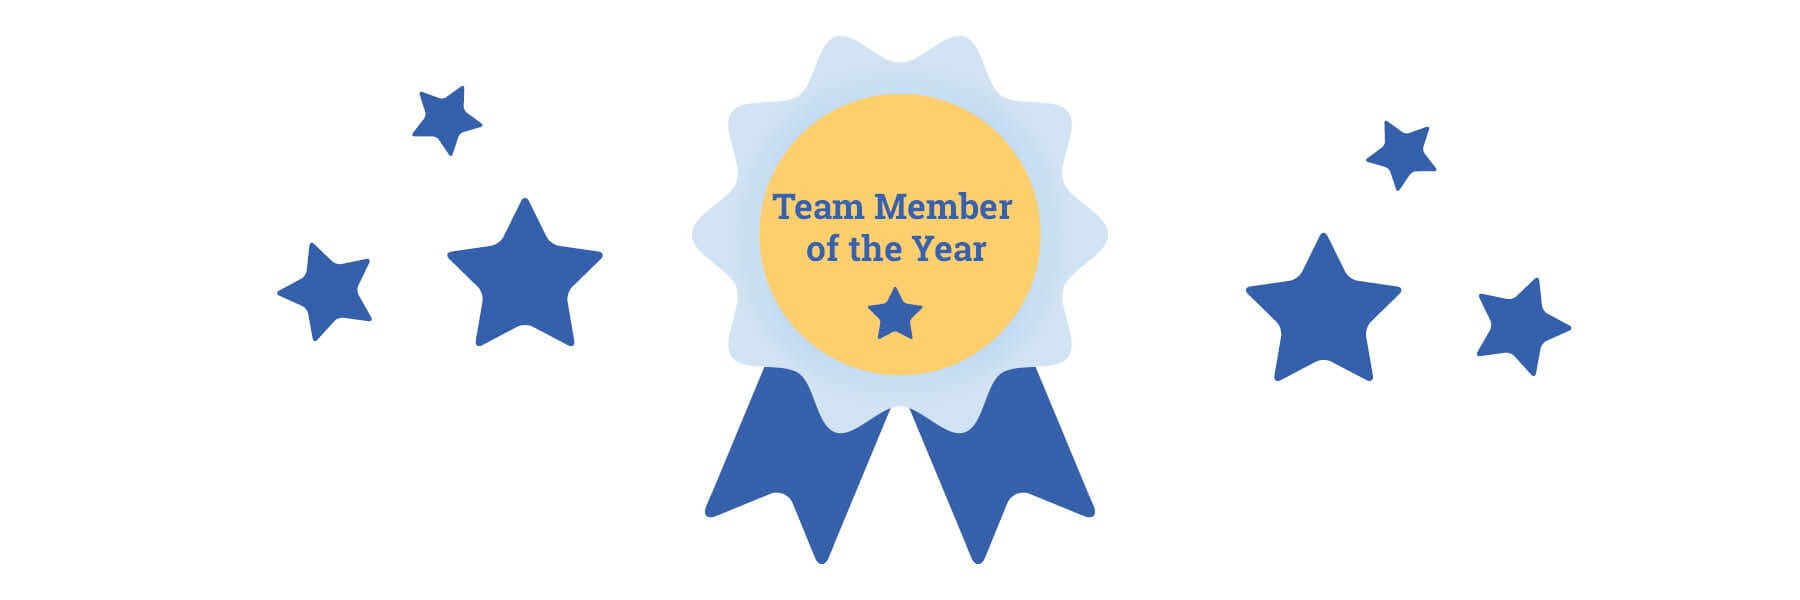 Team Member of the Year Award nomination